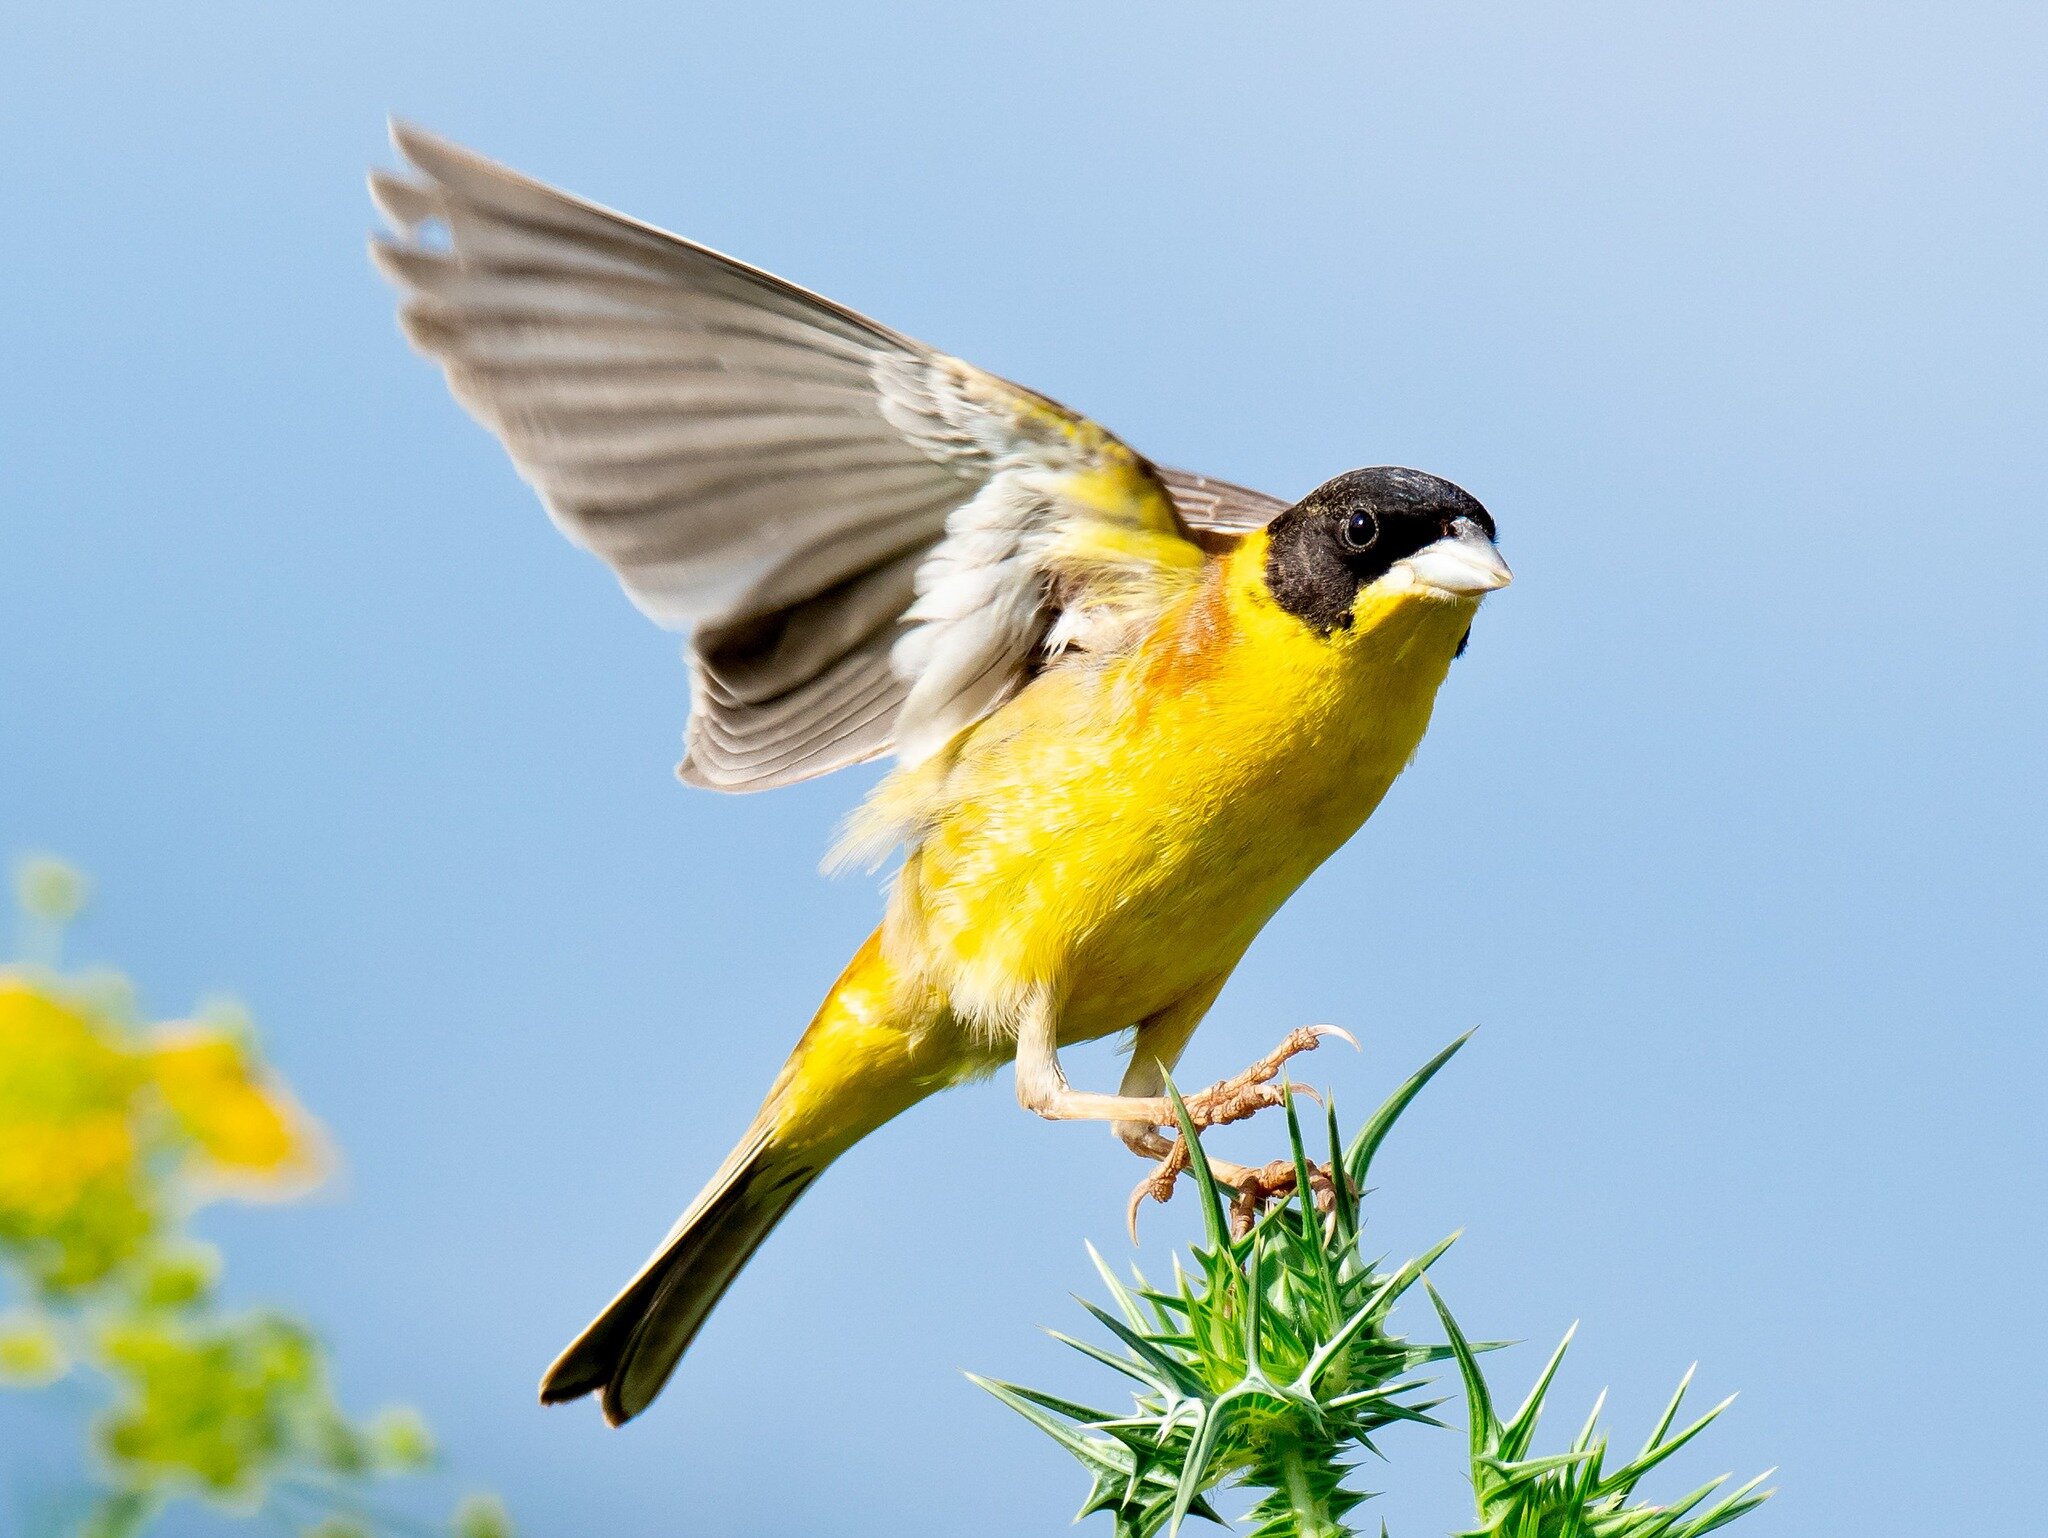 Meet the black-headed bunting 🐦,
Probably my favorite bird in Israel! This unique bunting species breeds in southeastern Europe and western Asia and migrates to its wintering grounds in India.
It has stunning colors and its singing is delightful.
Ph